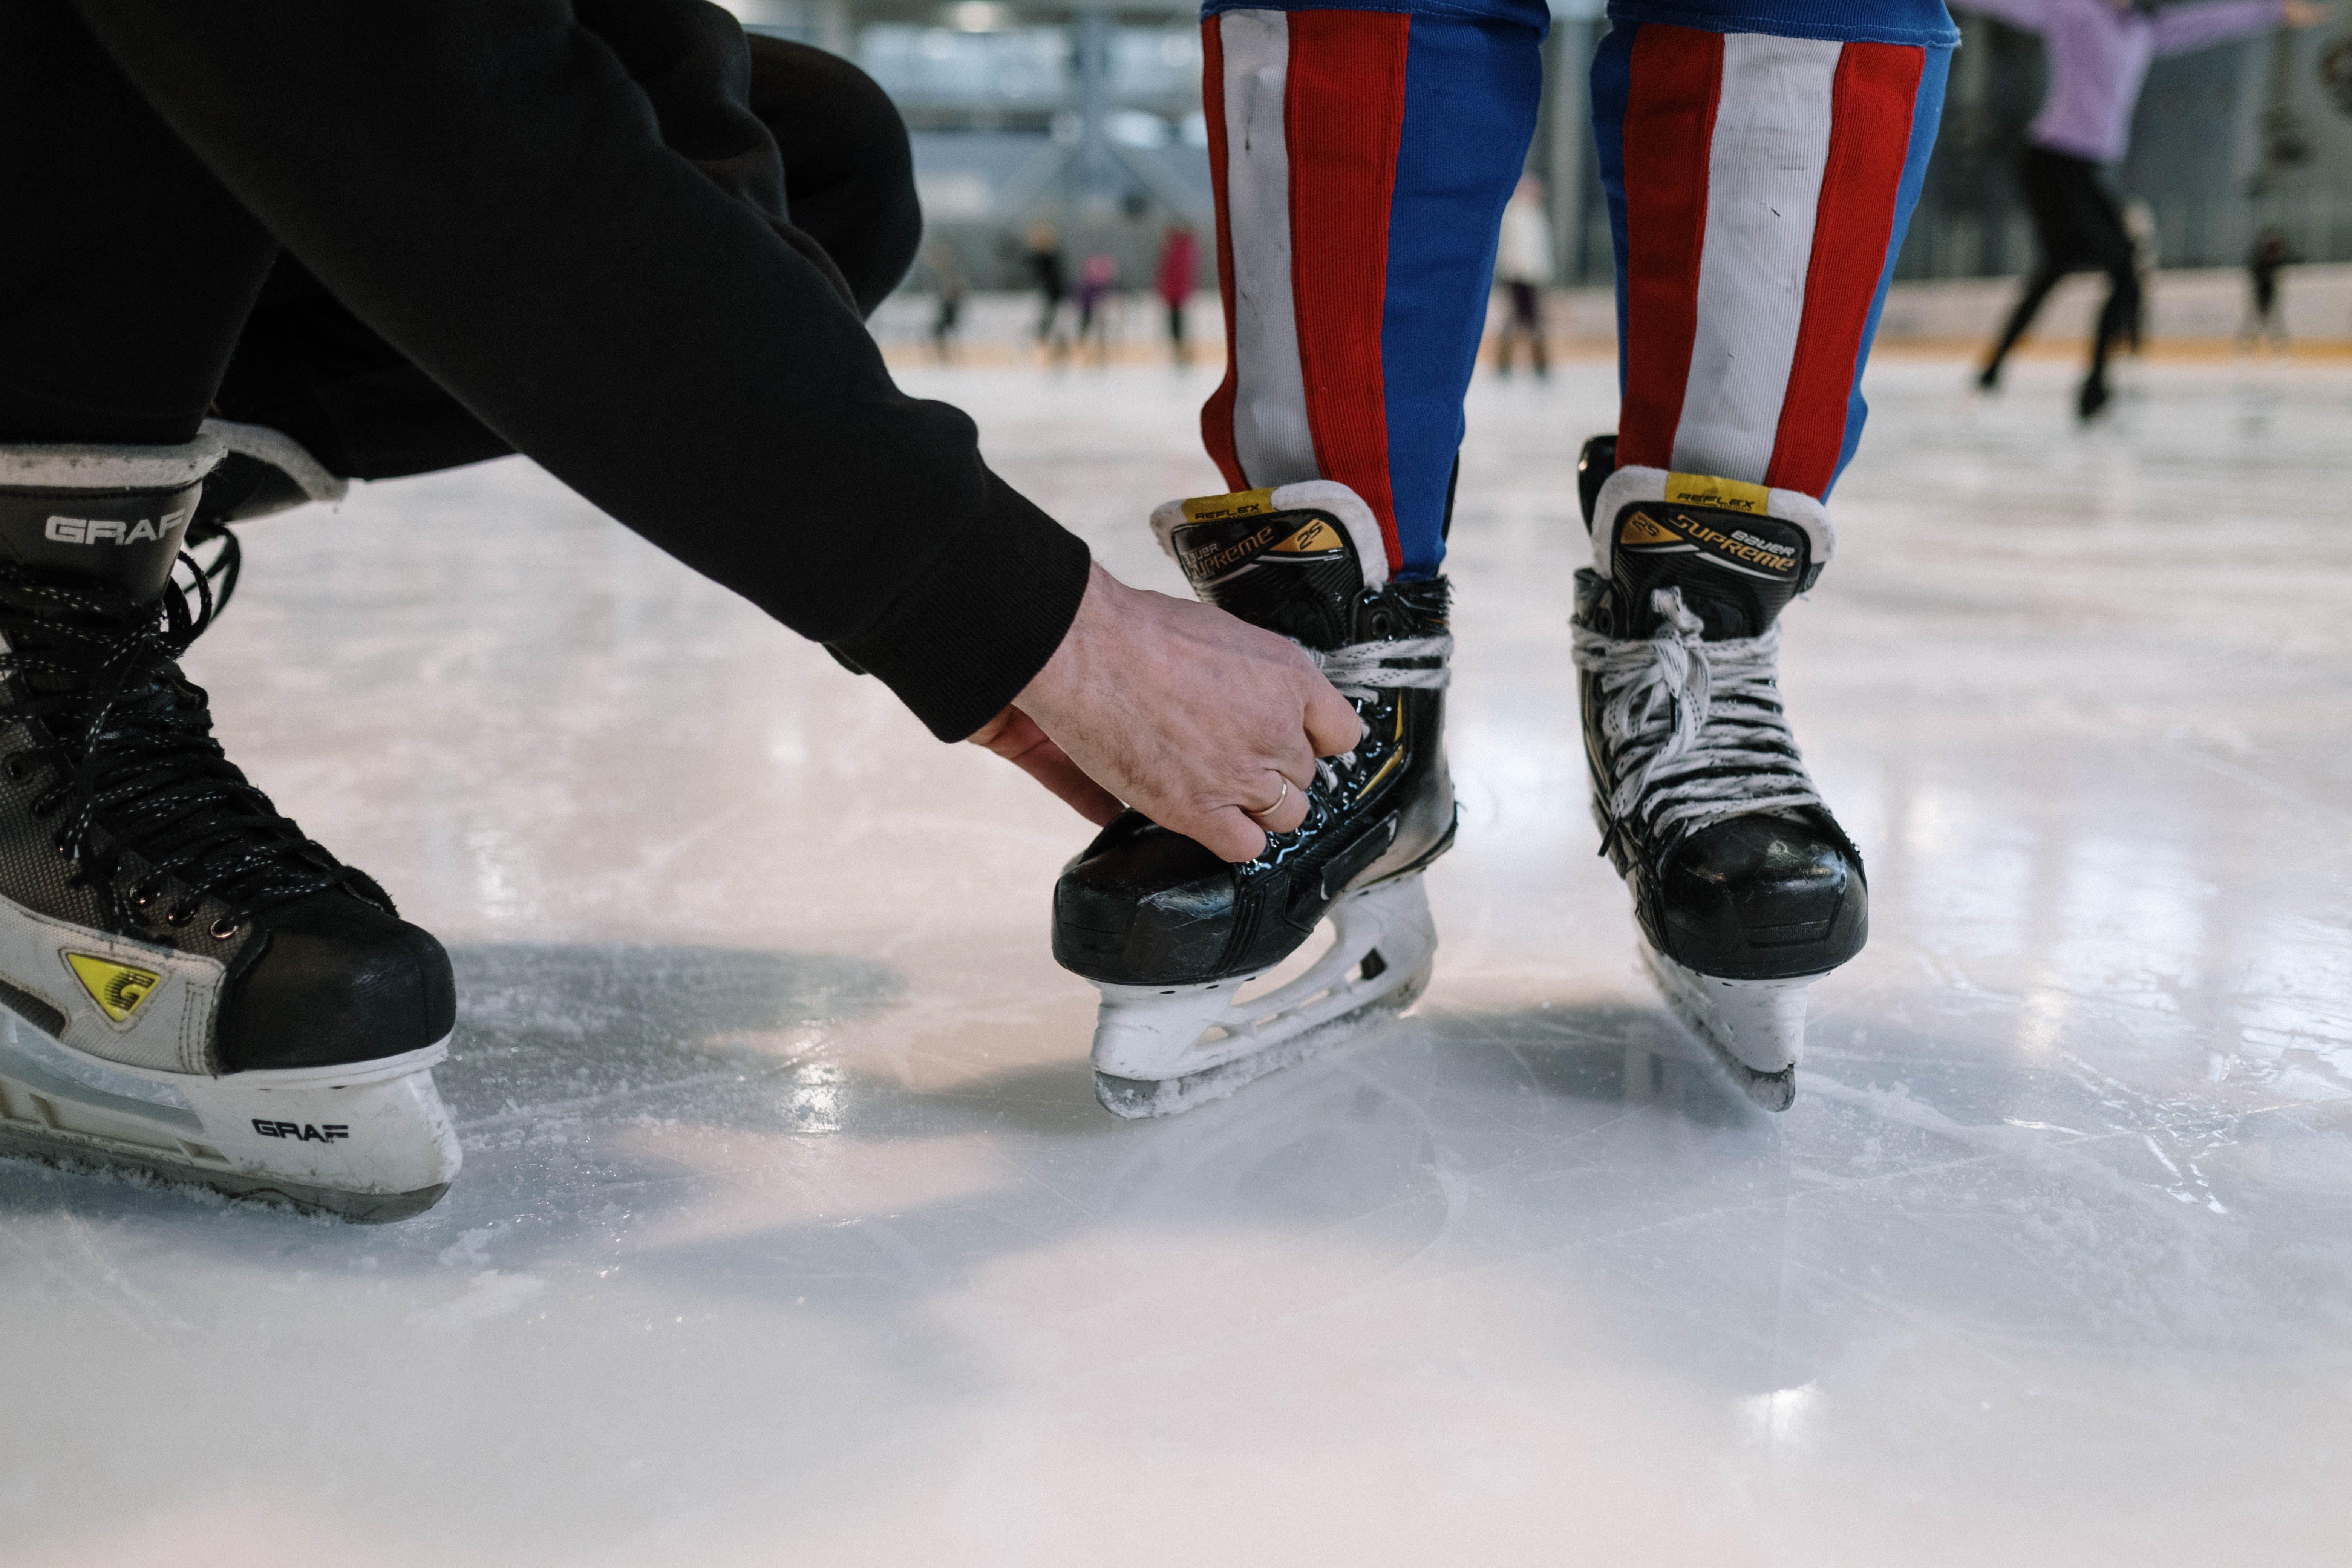 Photograph of a person tying another person's ice skates